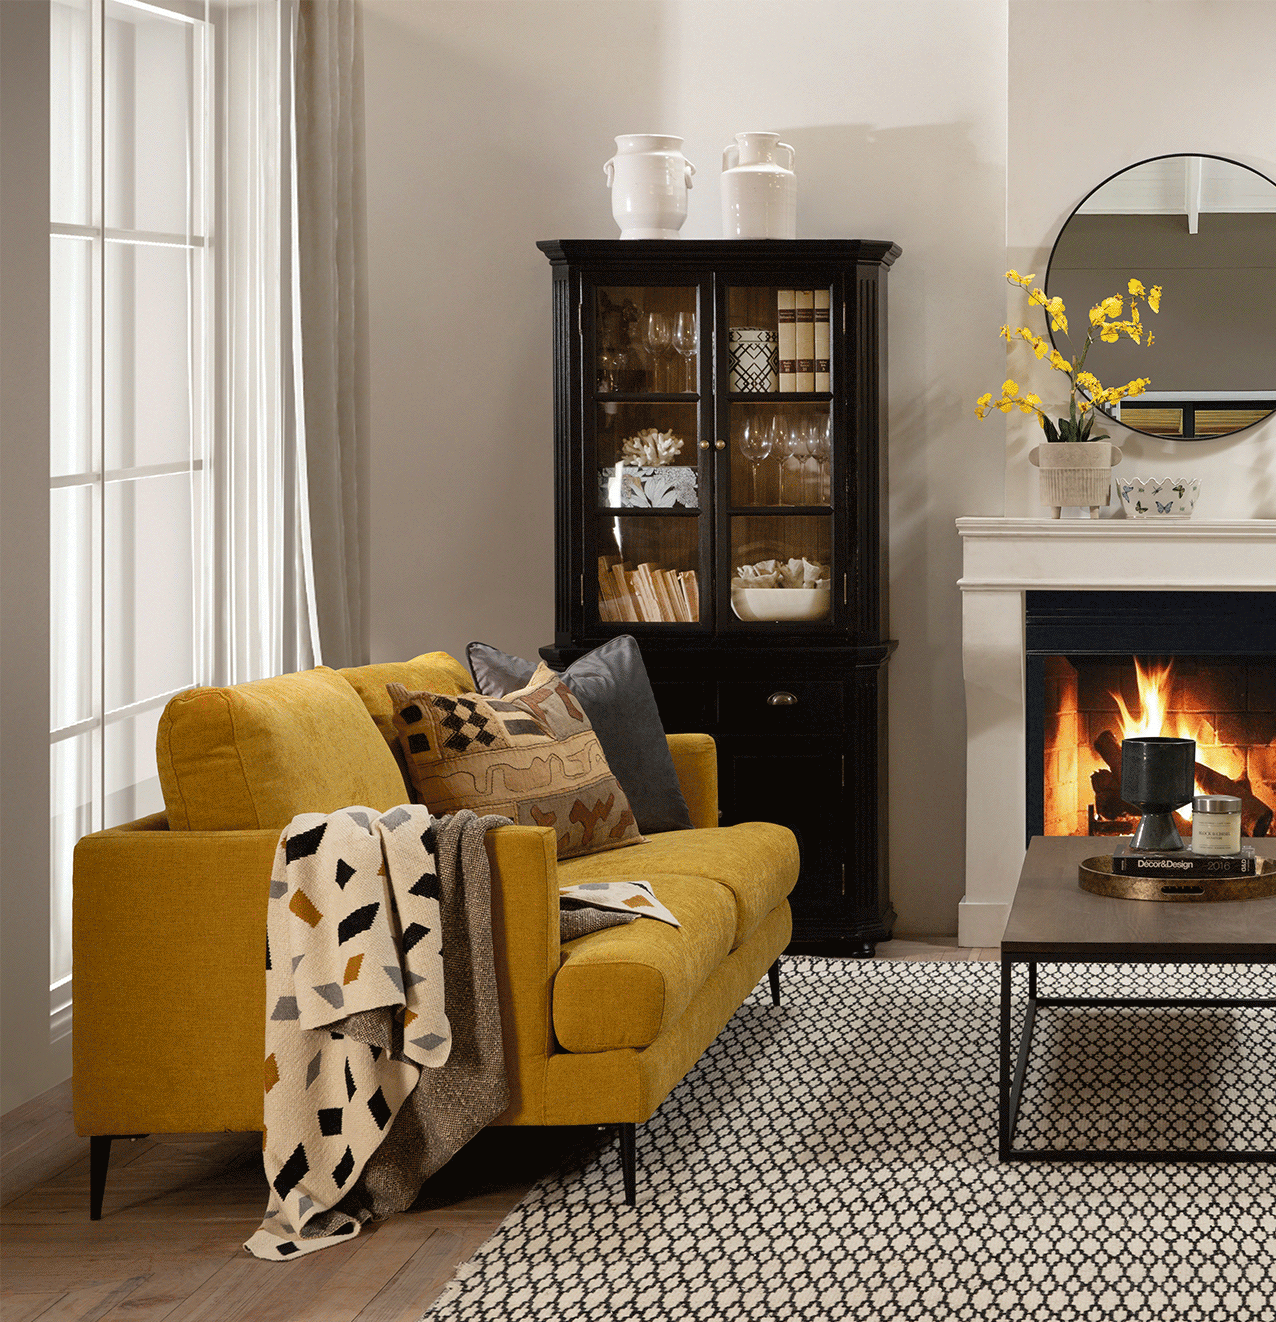 Modernist Living Room style with yellow sofa 